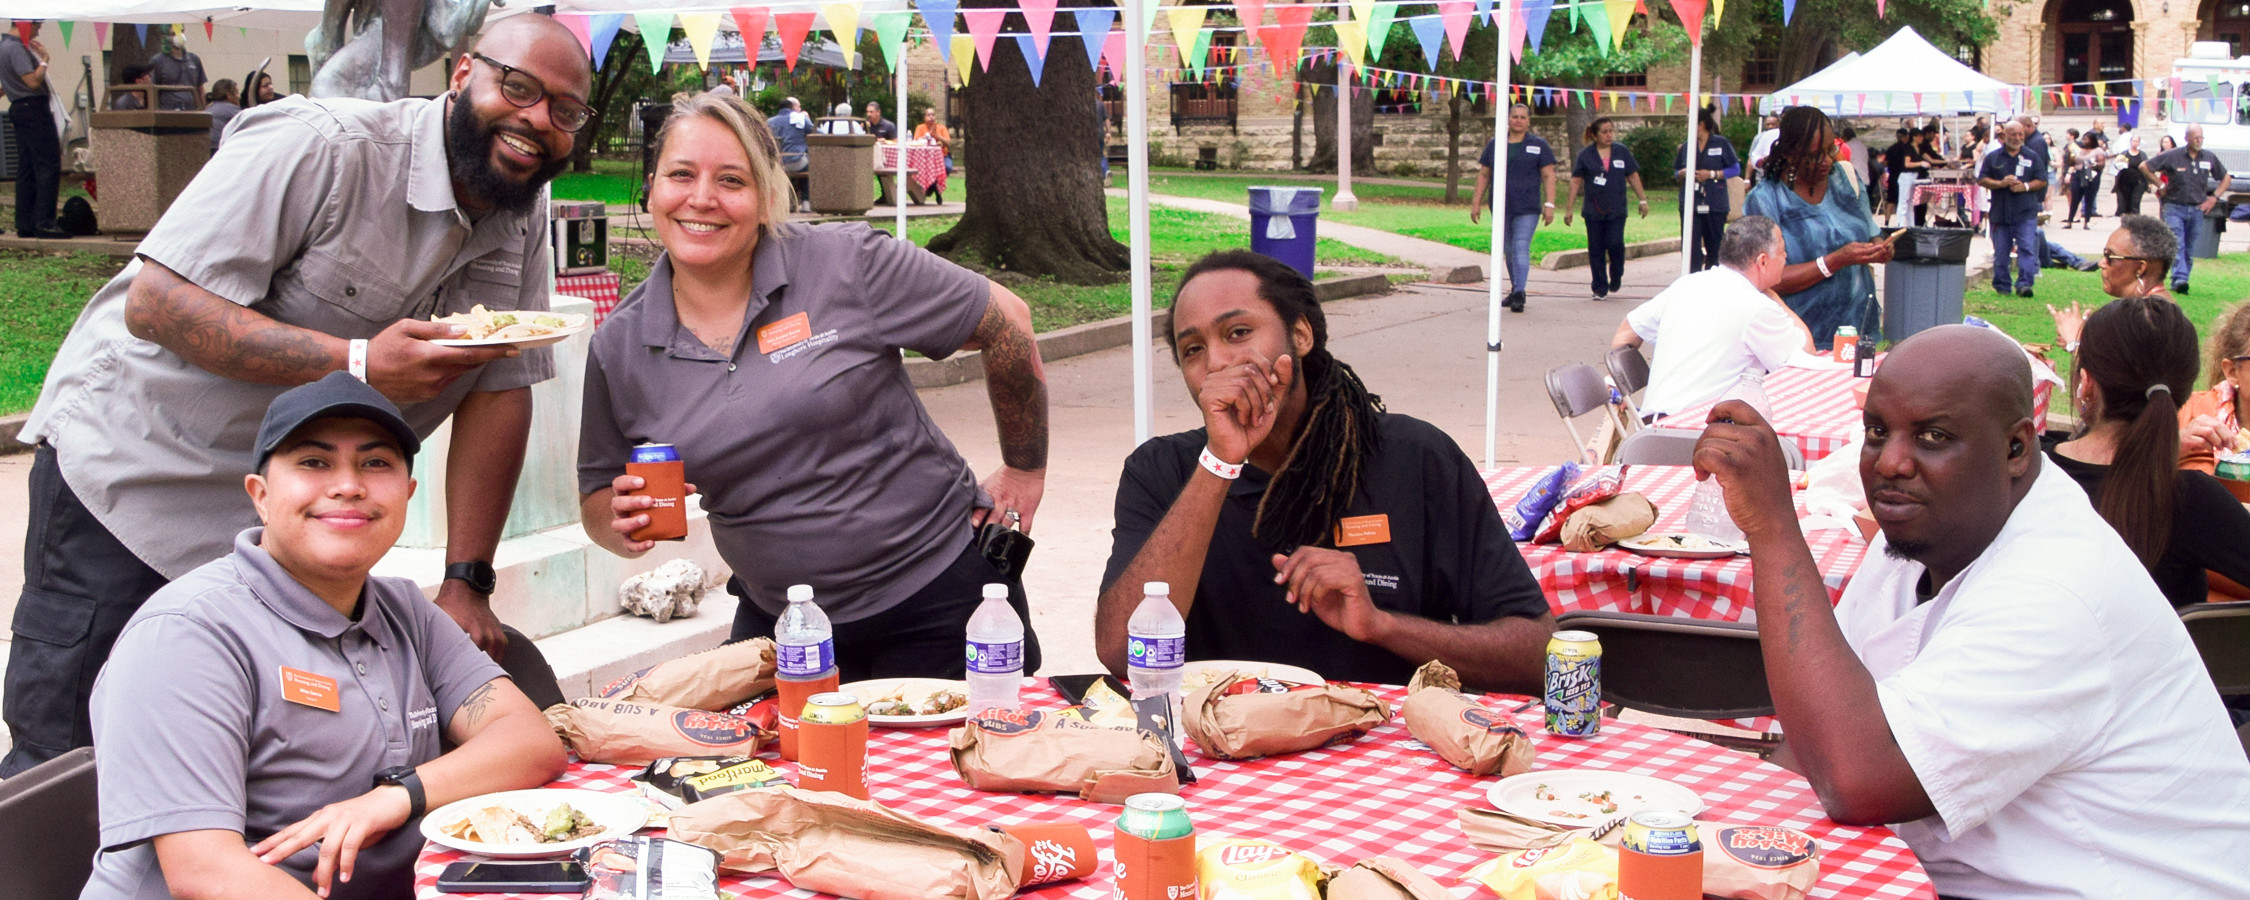 University employees enjoying food at a university housing and dining event